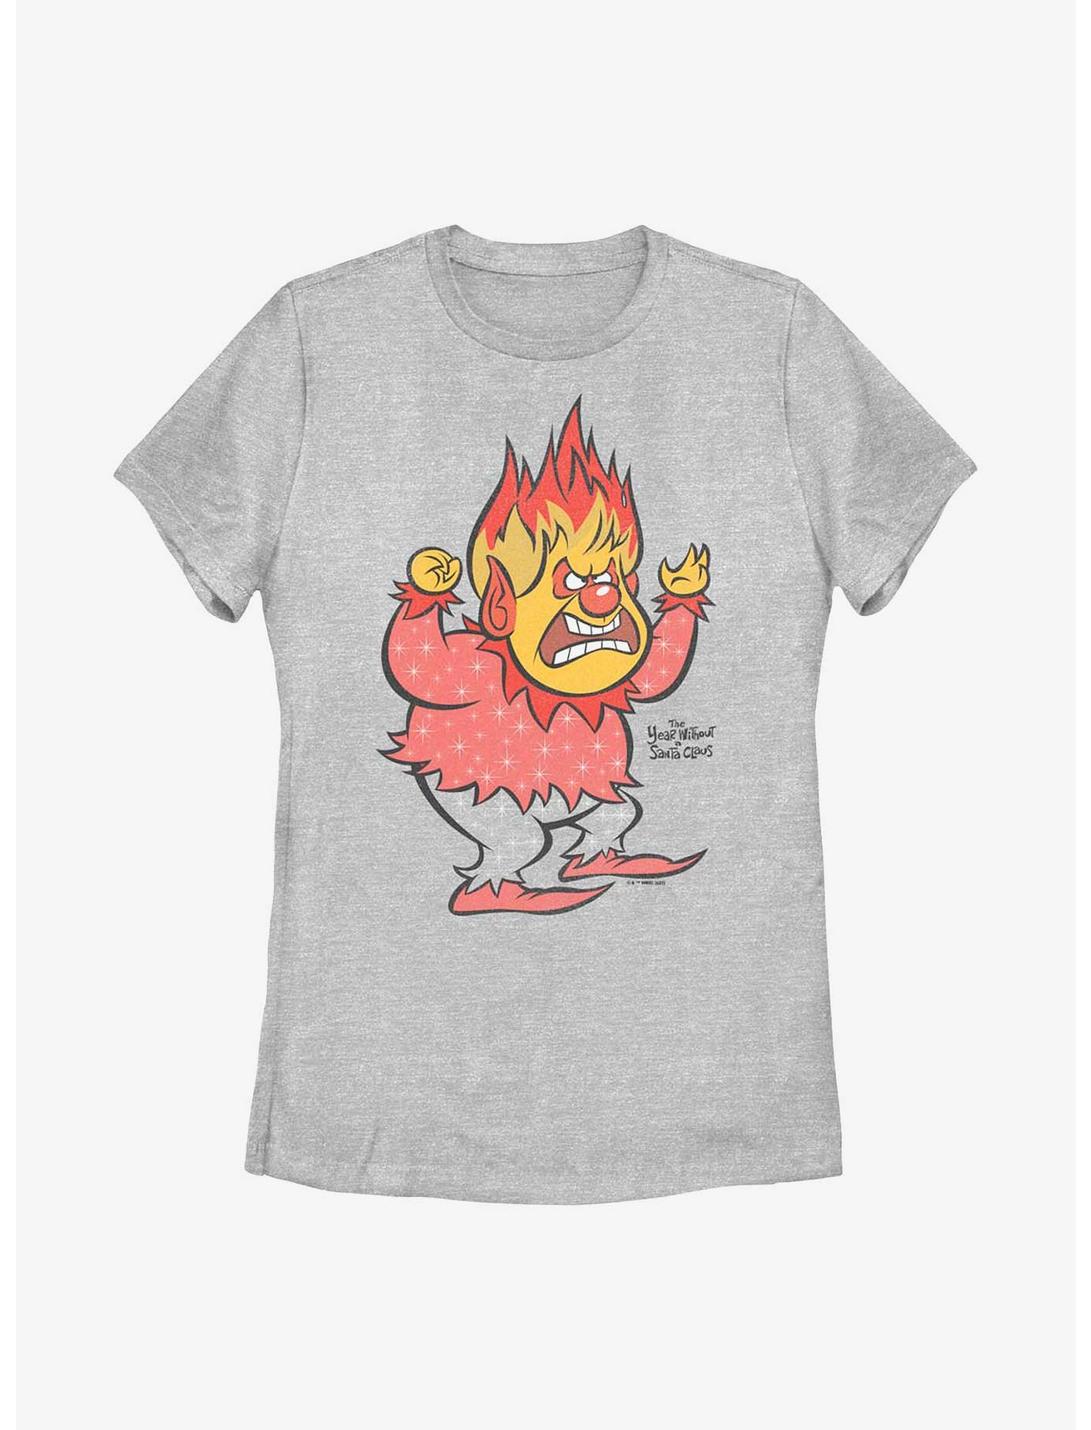 The Year Without Santa Claus Vintage Heat Miser Womens T-Shirt, ATH HTR, hi-res